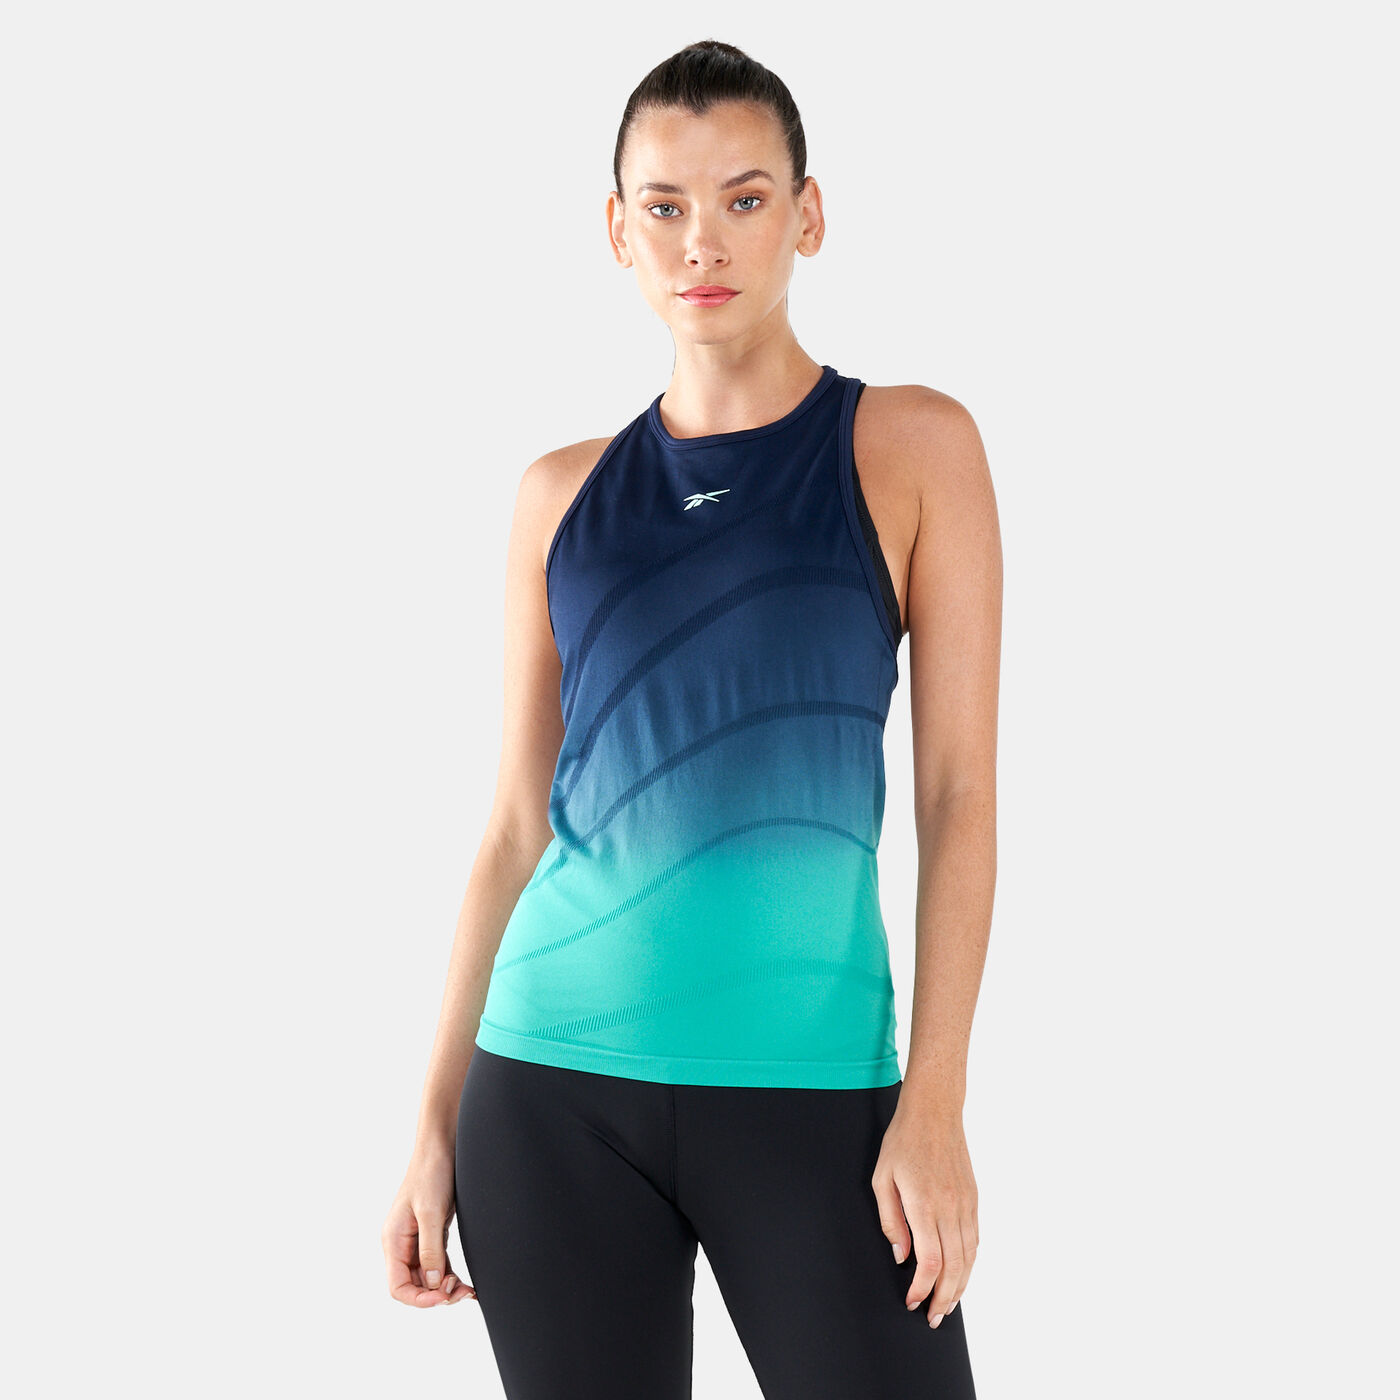 Women's United By Fitness Seamless Tank Top